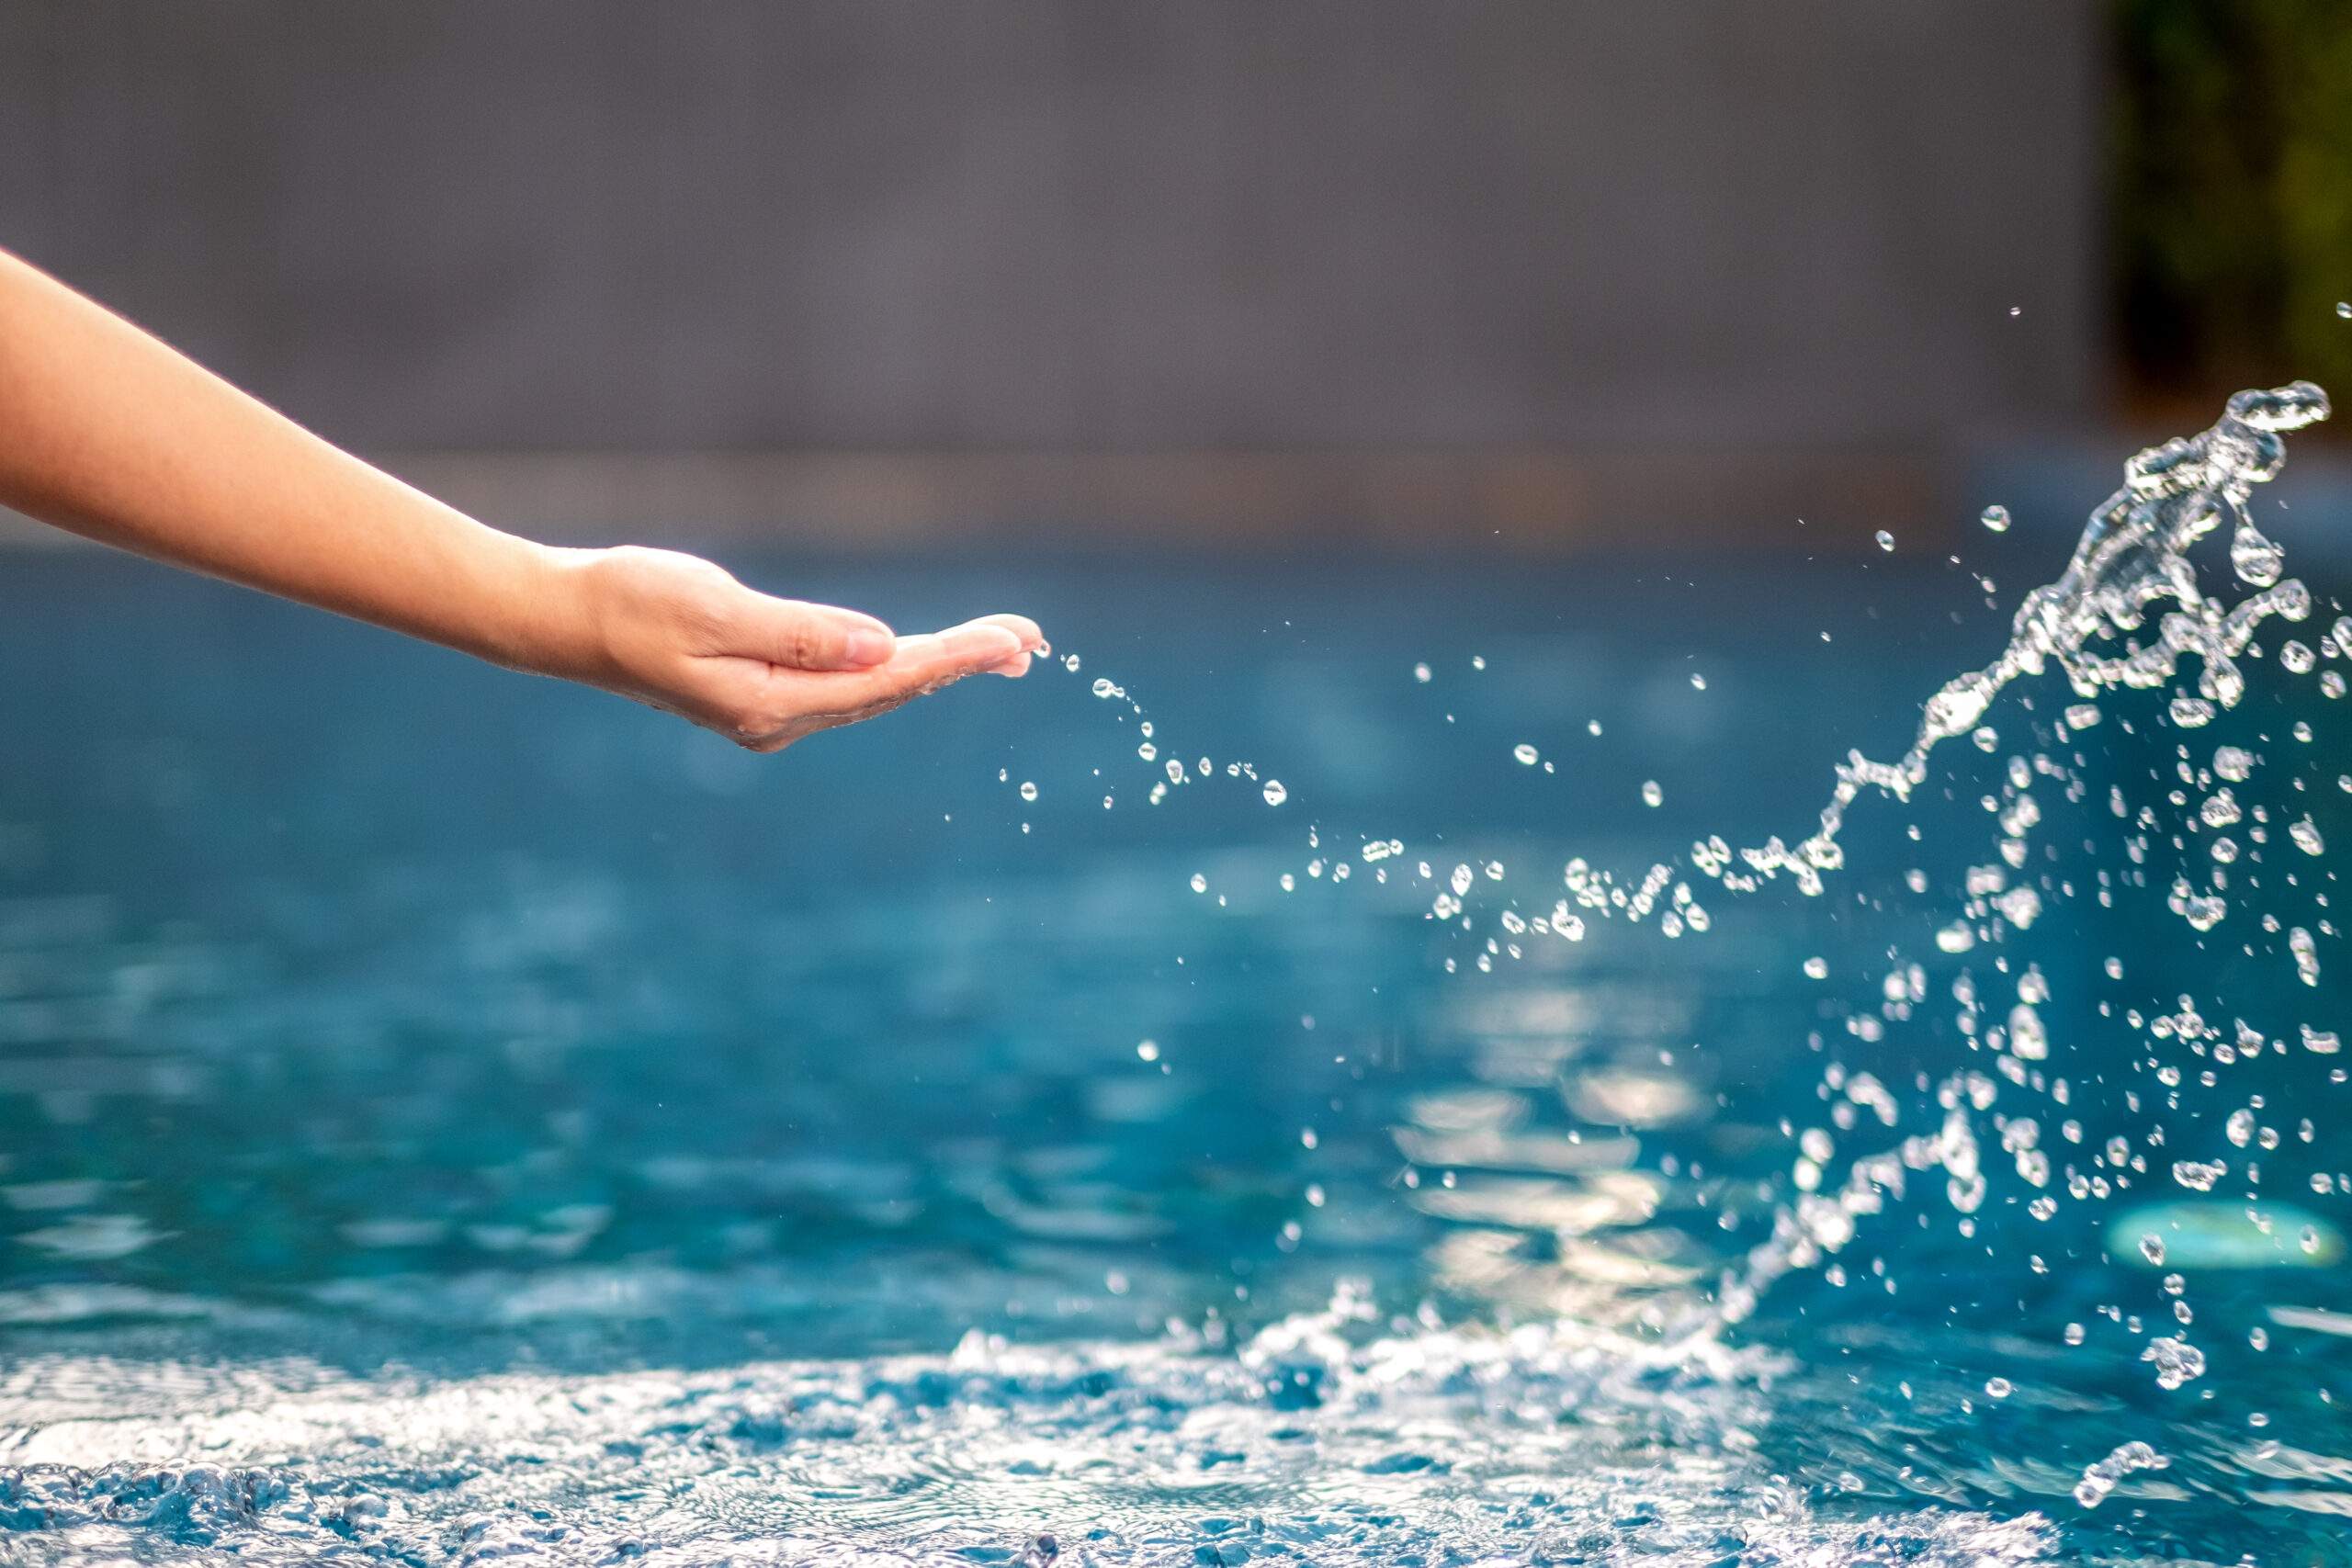 Closeup image of a hand splashing water in the pool